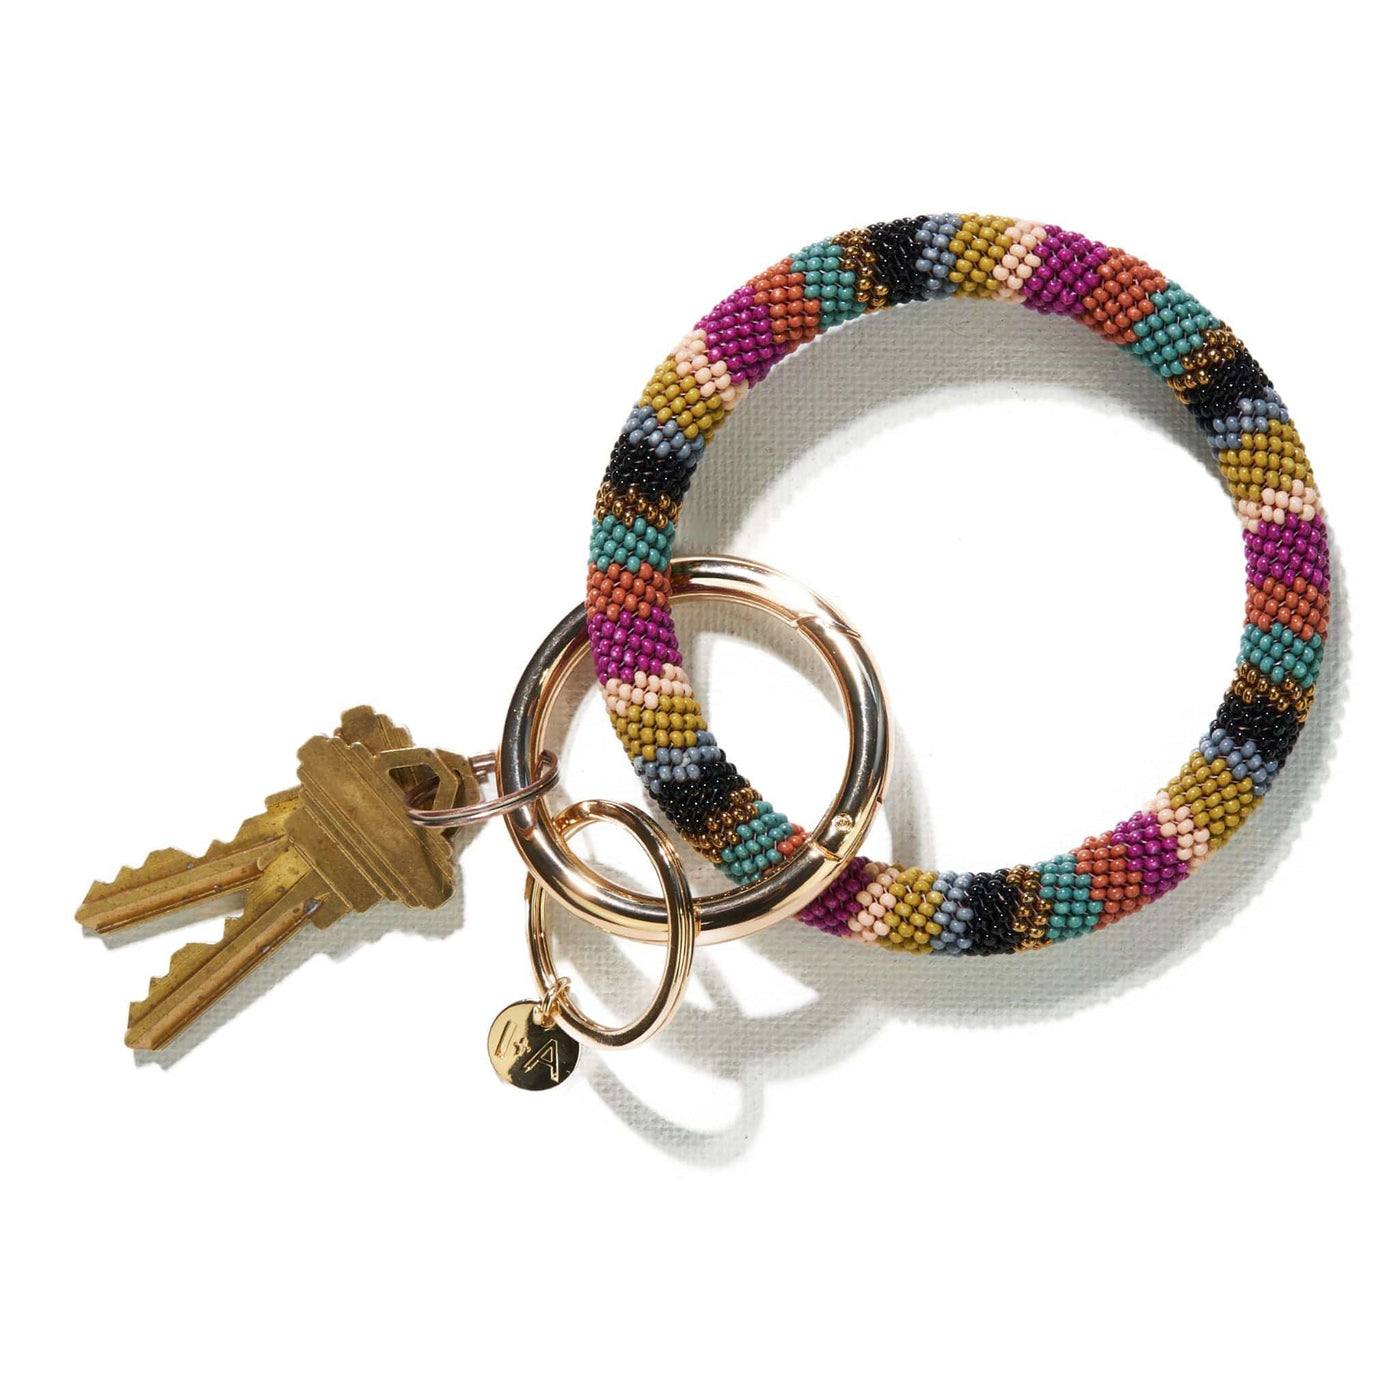 Chloe key ring in muted rainbow, front view.